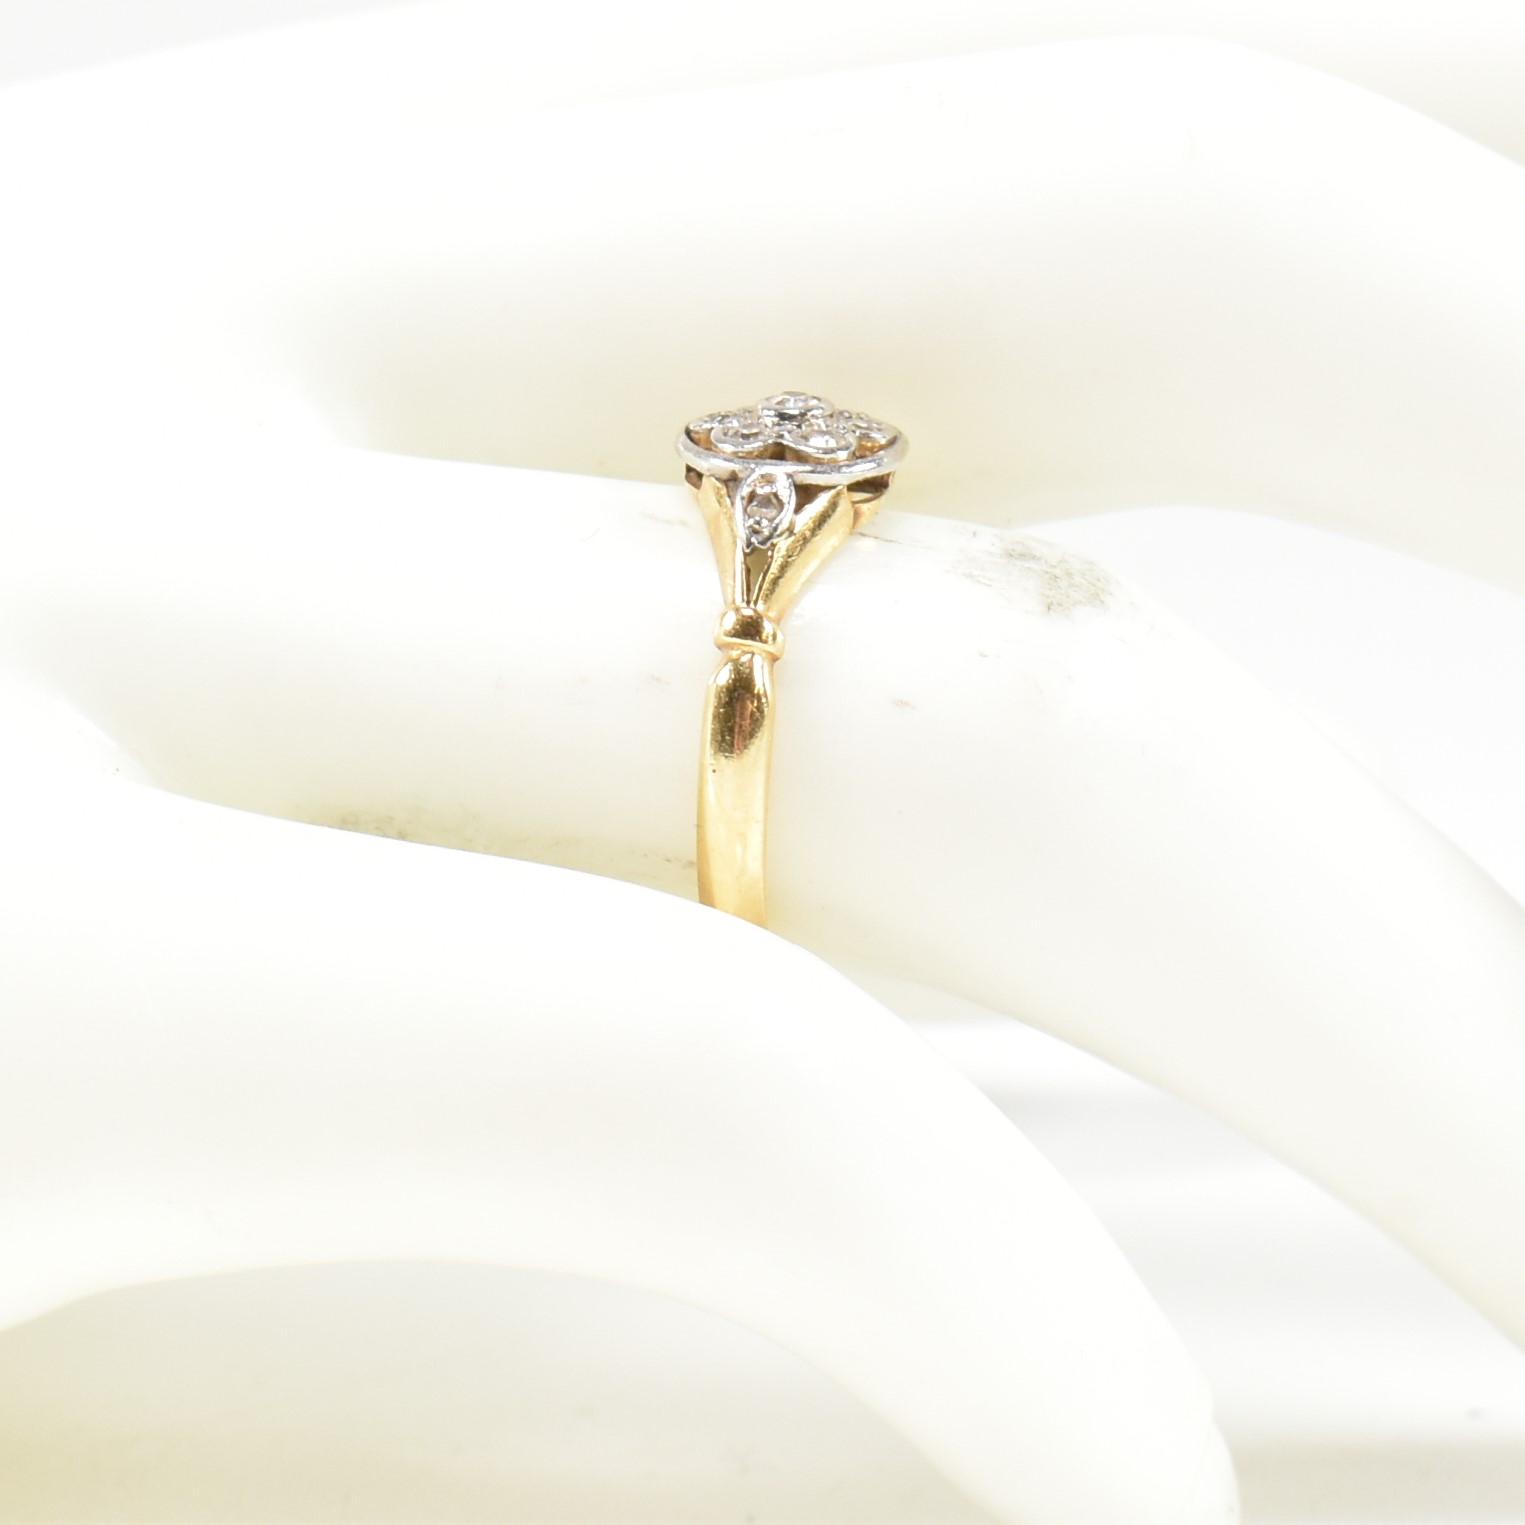 18CT GOLD & DIAMOND CLUSTER RING - Image 9 of 9